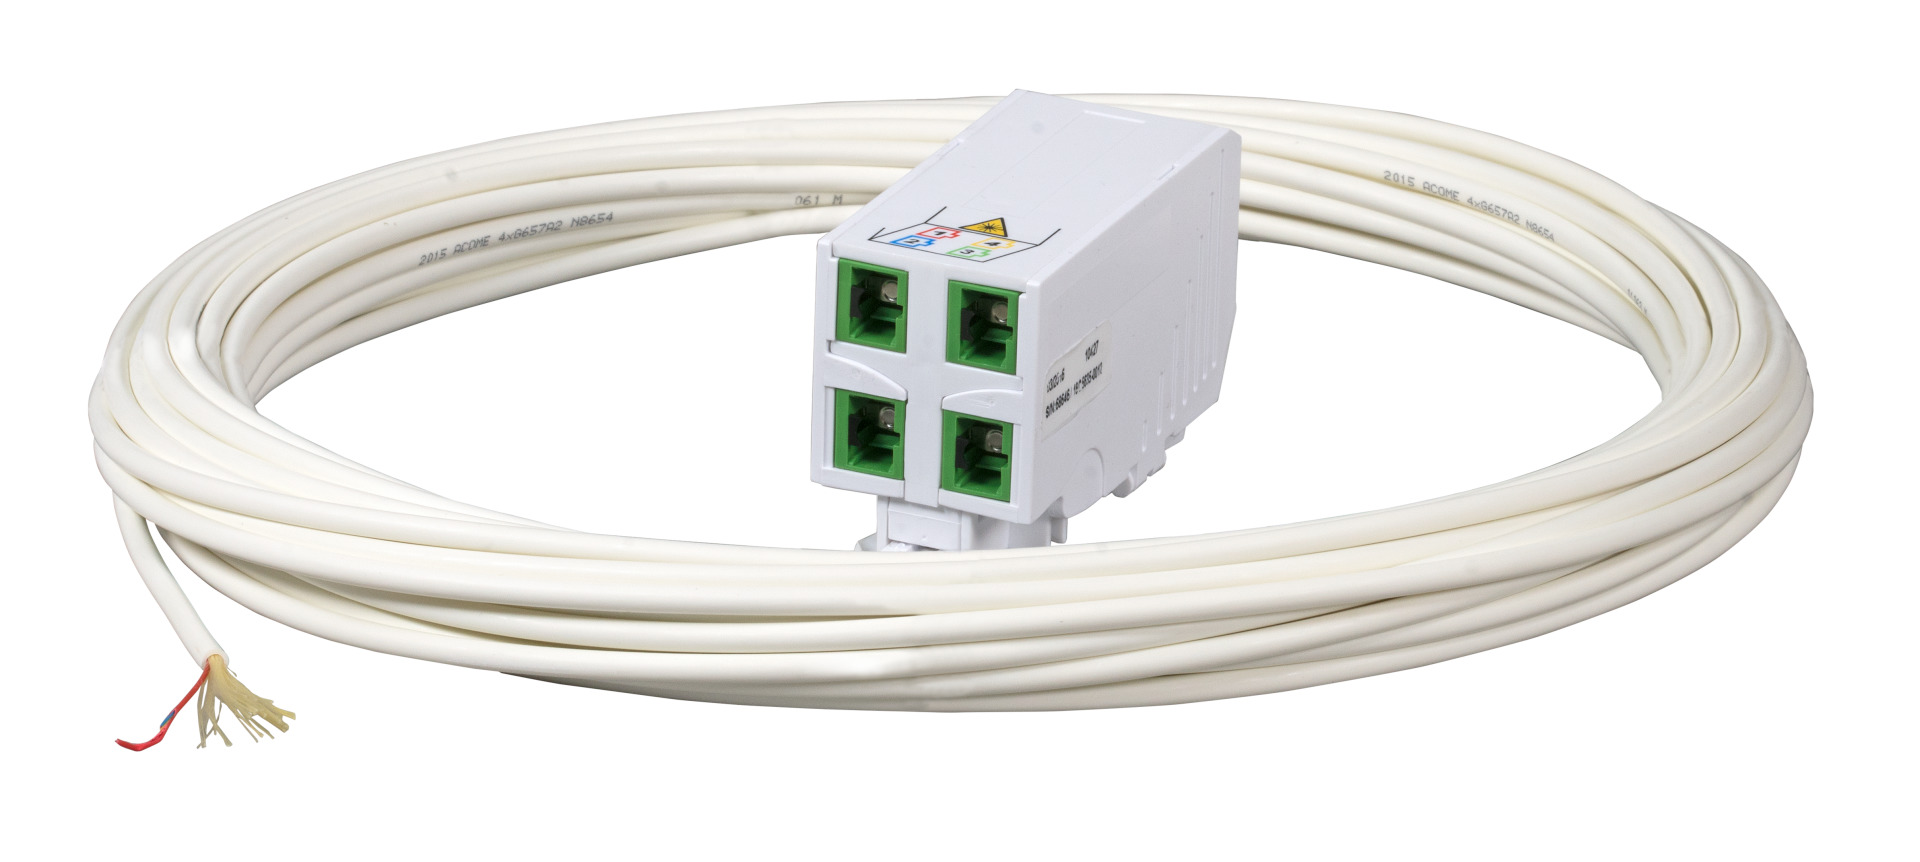 FTTH DIN RAIL Adapter,4x SC/APC adapter, Laserprotection integrated,100m DropCa